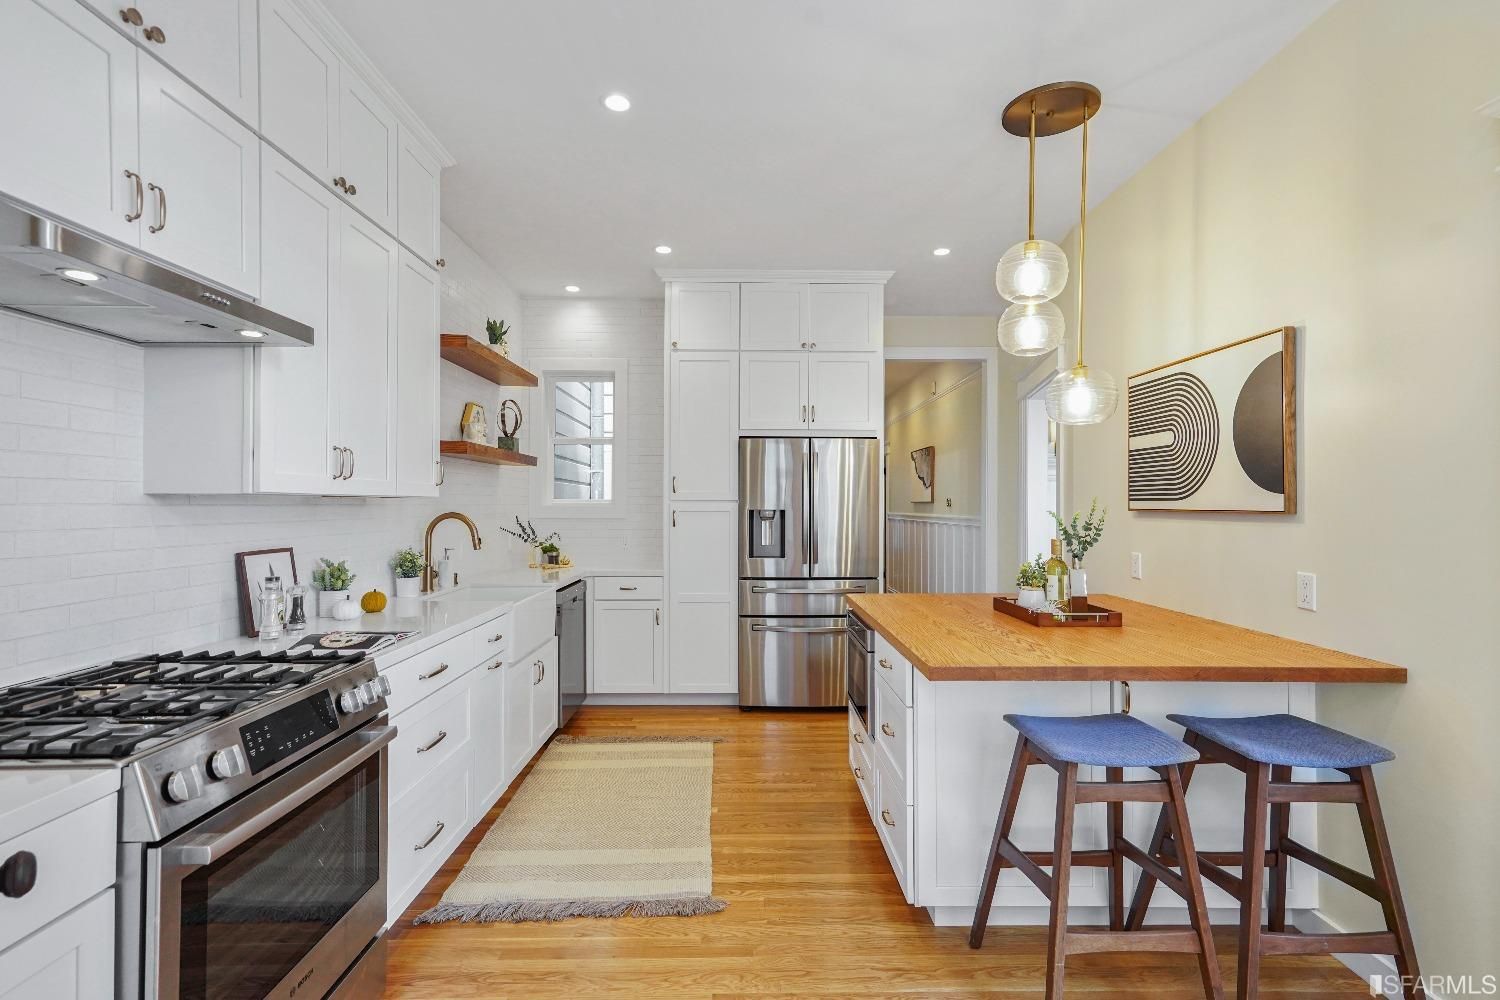 View of the kitchen at 351 27th Street, featuring white cabinets